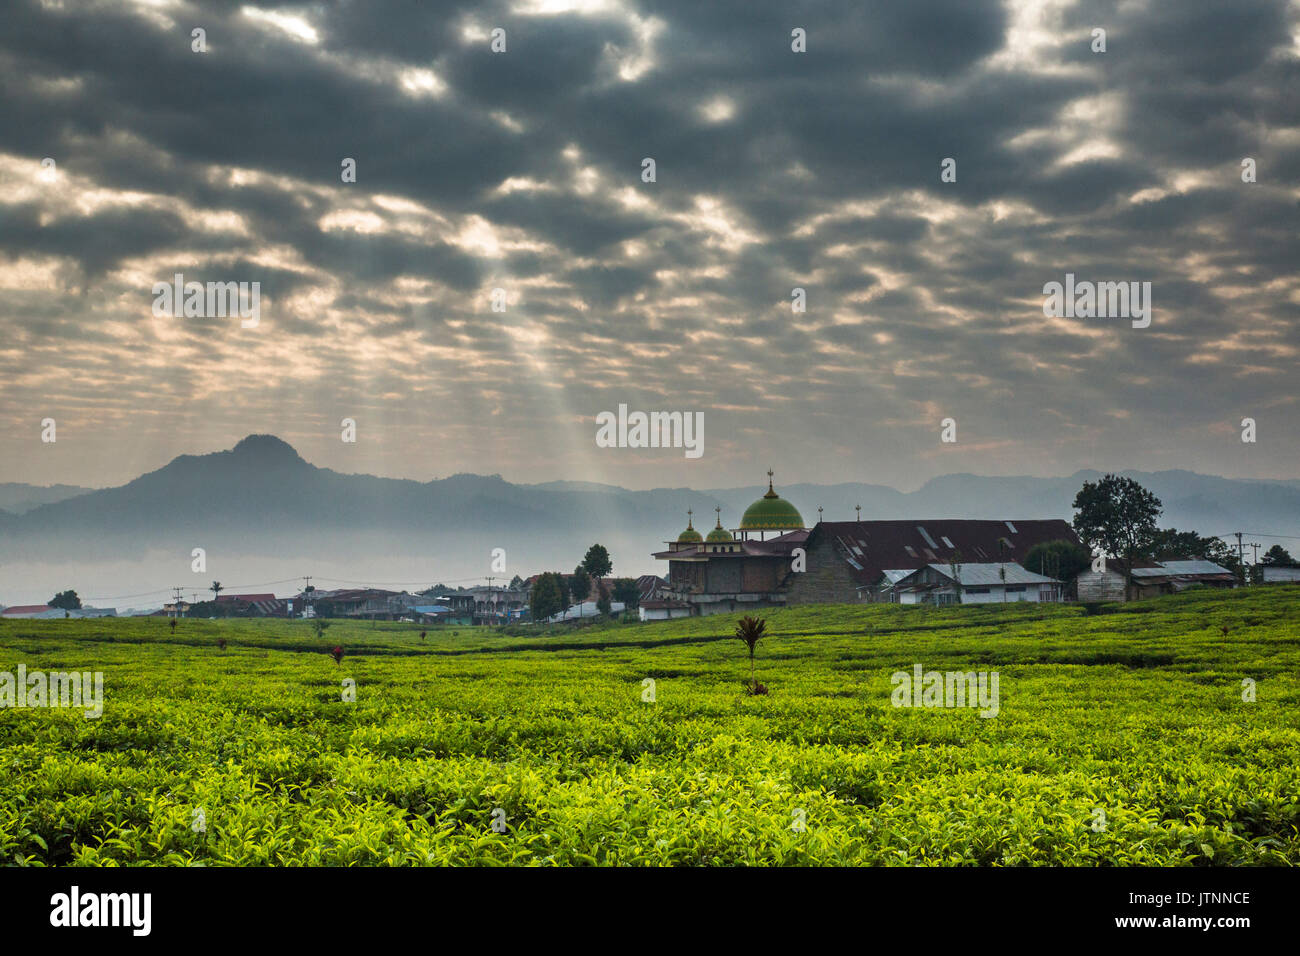 Sunlight streams through pocked clouds above a vast tea field with a small town and mosque and mountains on the horizon. Kerinci Valley, Sumatra, Indonesia Stock Photo